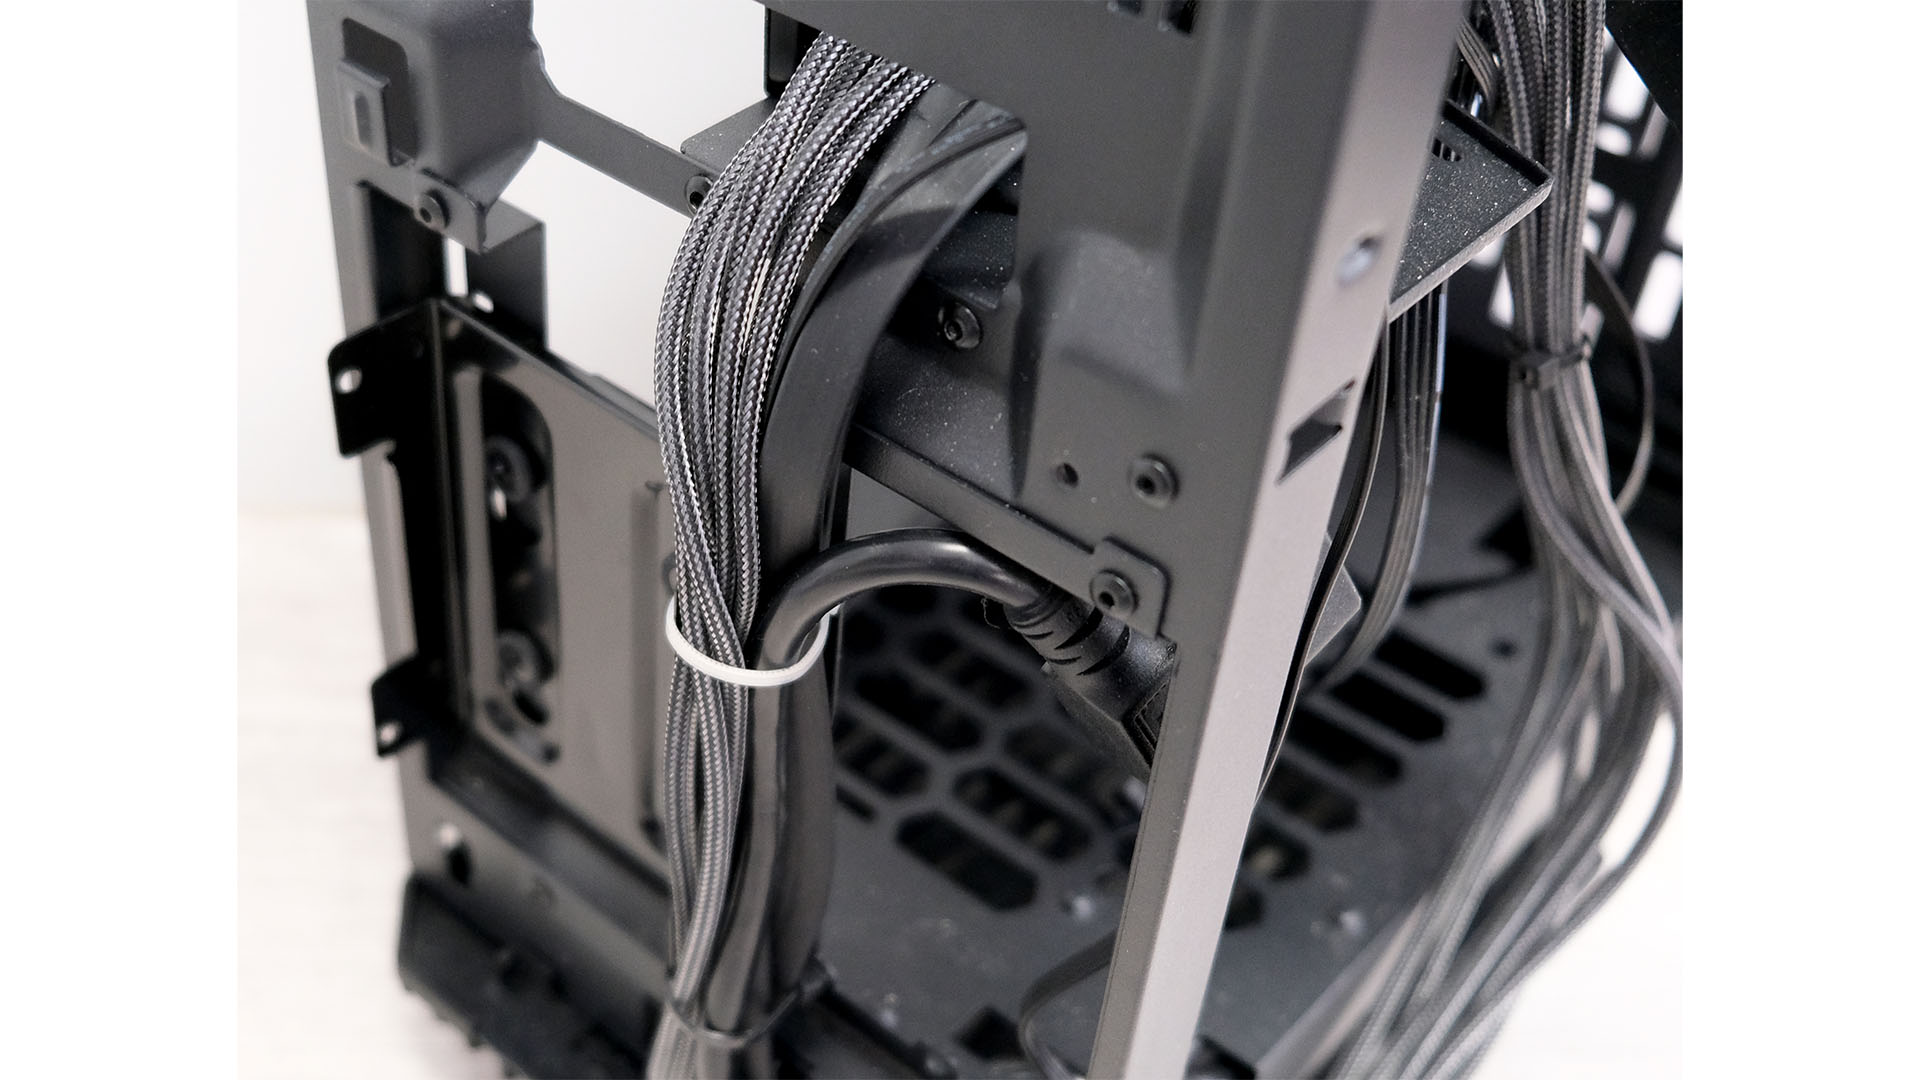 PC cable management guide